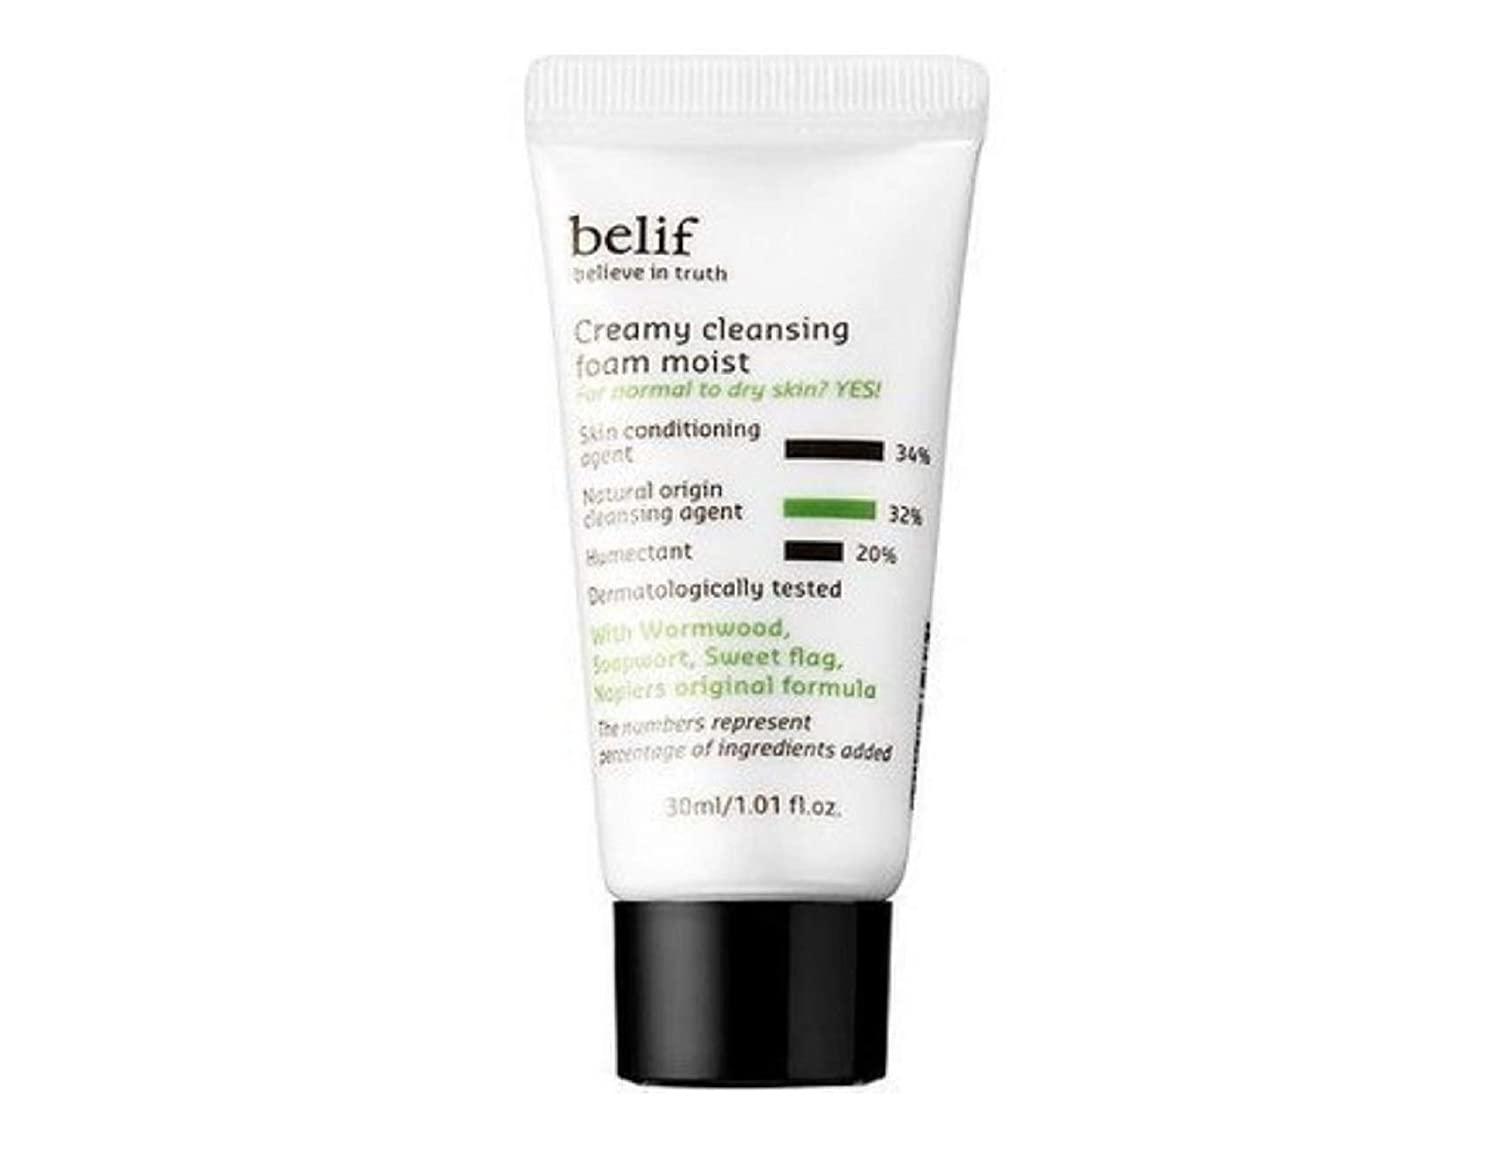 BELIF Creamy Cleansing Foam Moist For Normal To Dry Skin Travel